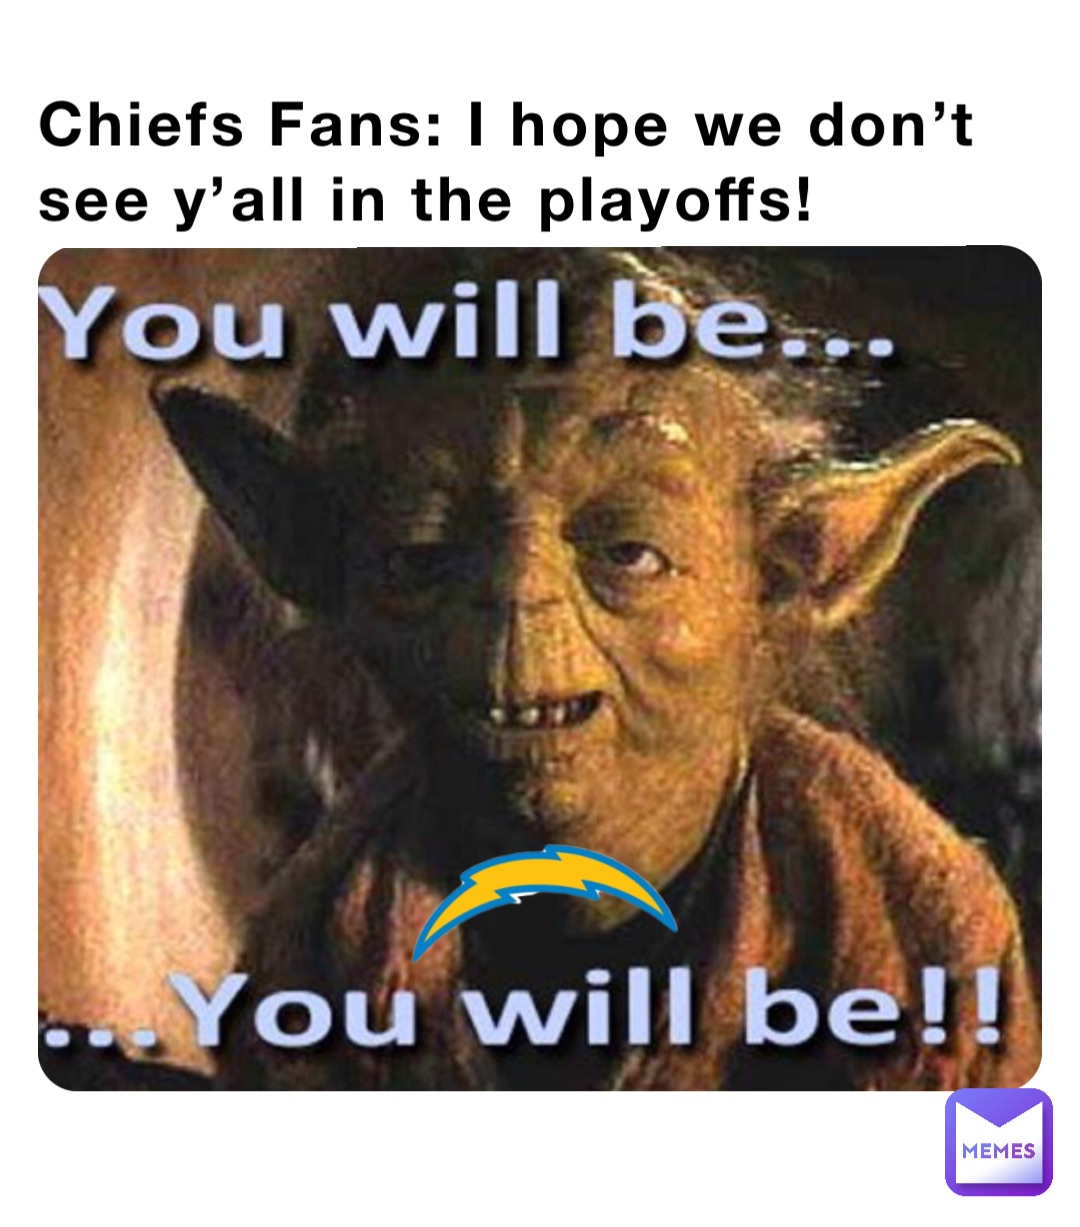 Chiefs Fans: I hope we don’t see y’all in the playoffs!